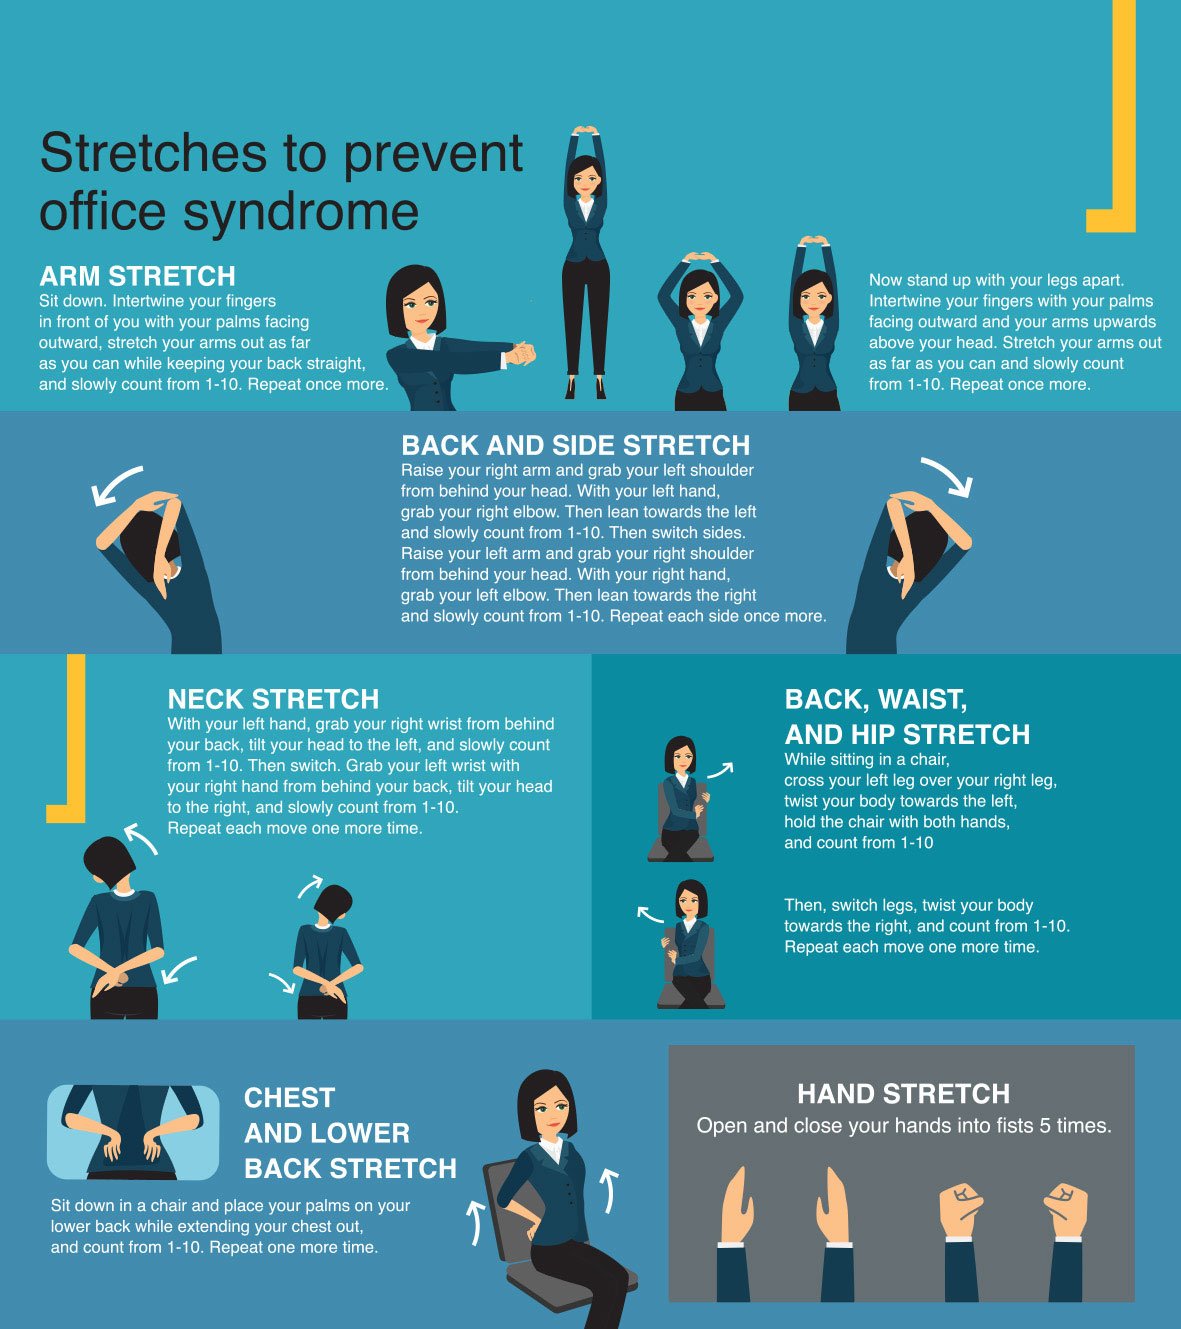 Office-stretches-Dec19 infographic